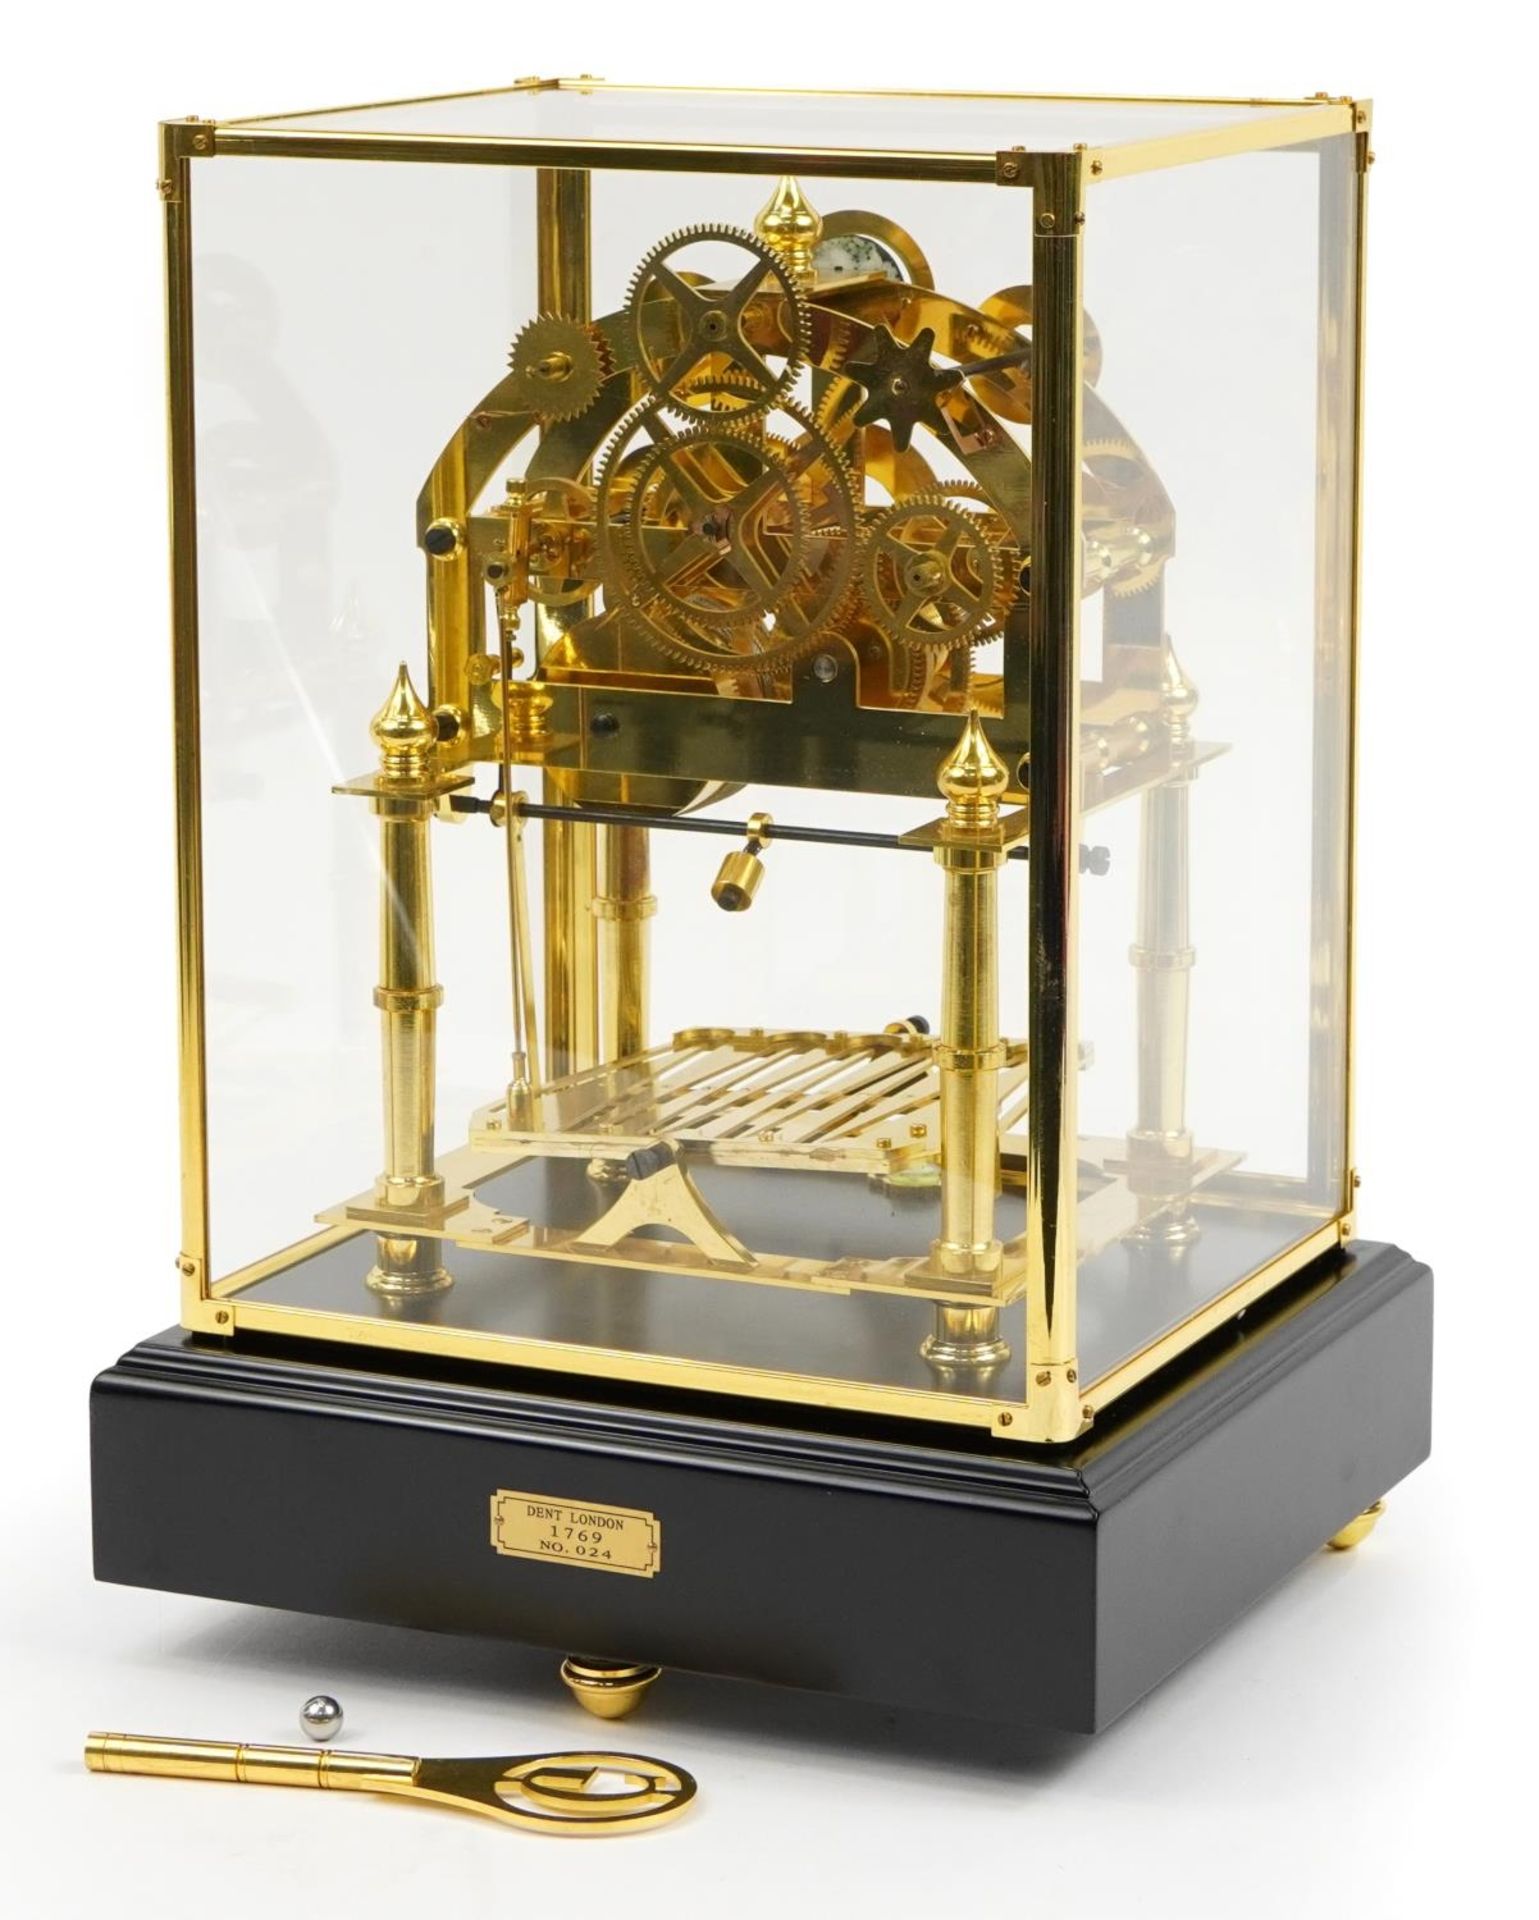 Congreve style rolling ball clock housed under a glazed brass display case with ebonised base, - Image 3 of 3